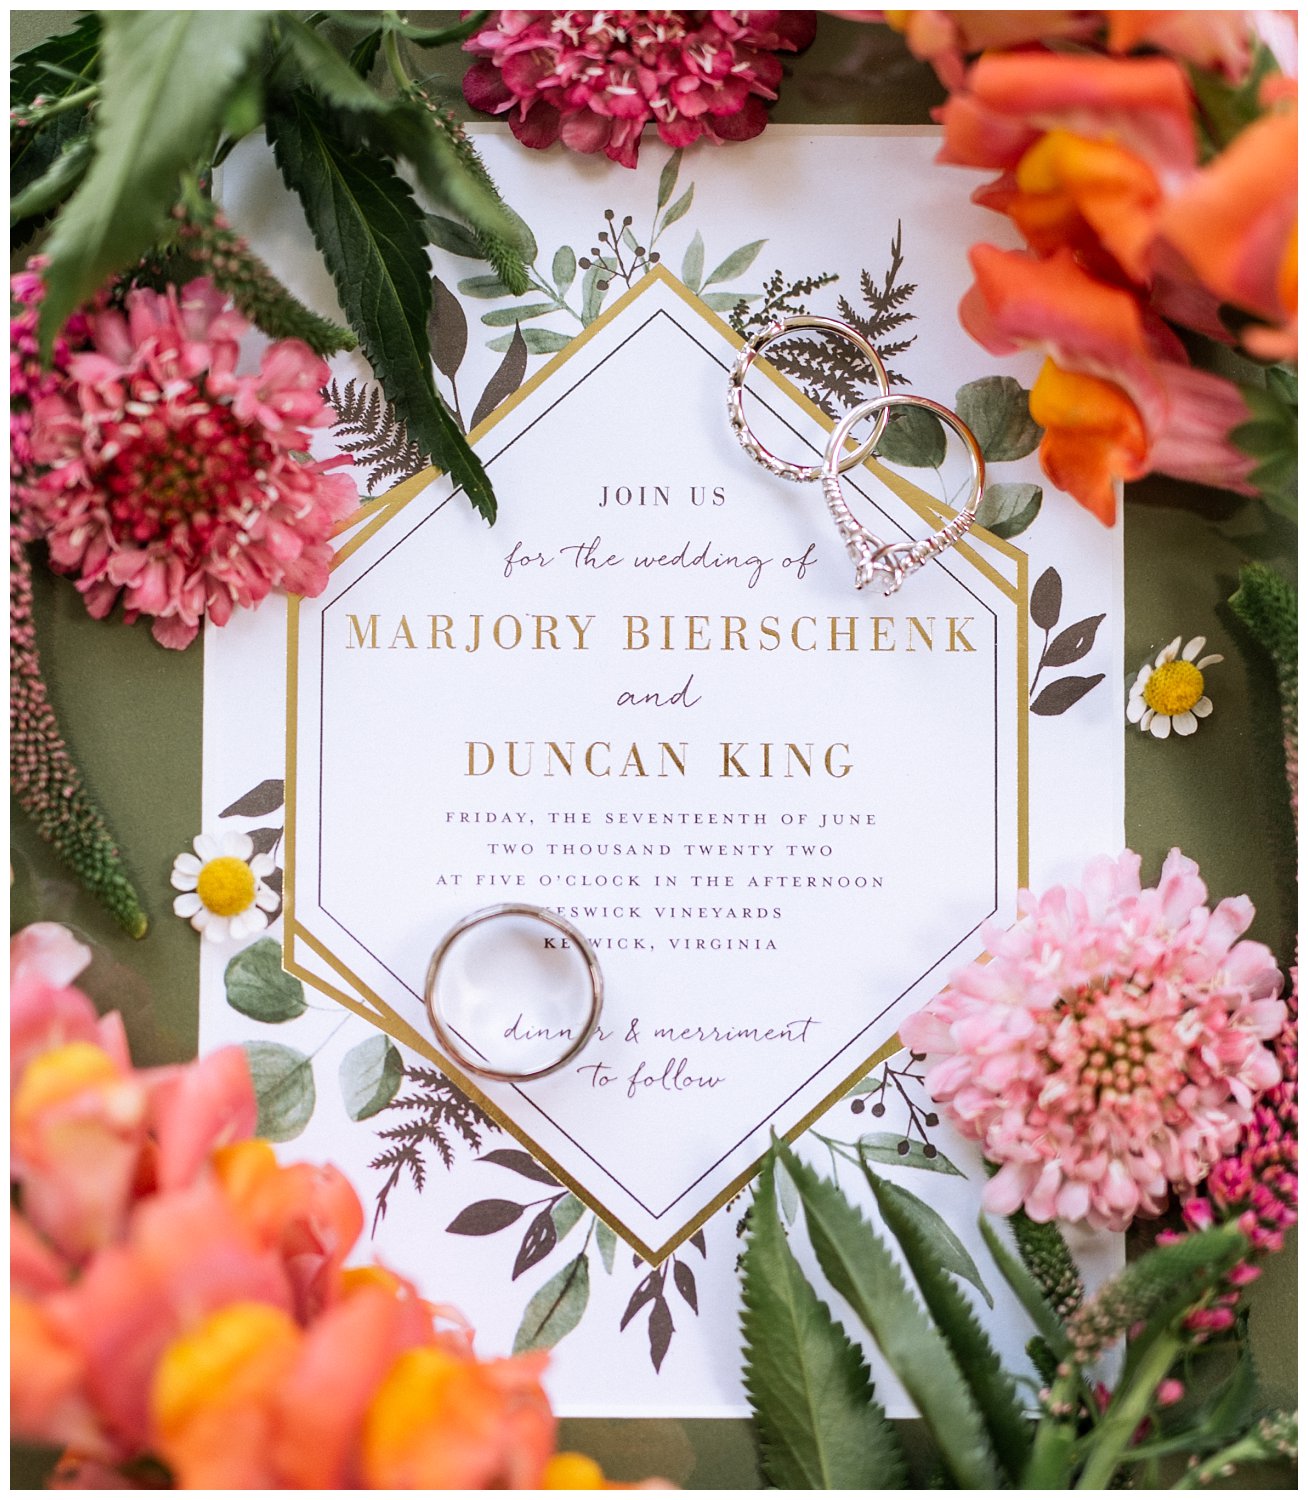 Vibrant wedding invitation for a summer wedding surrounded by pink and orange flowers